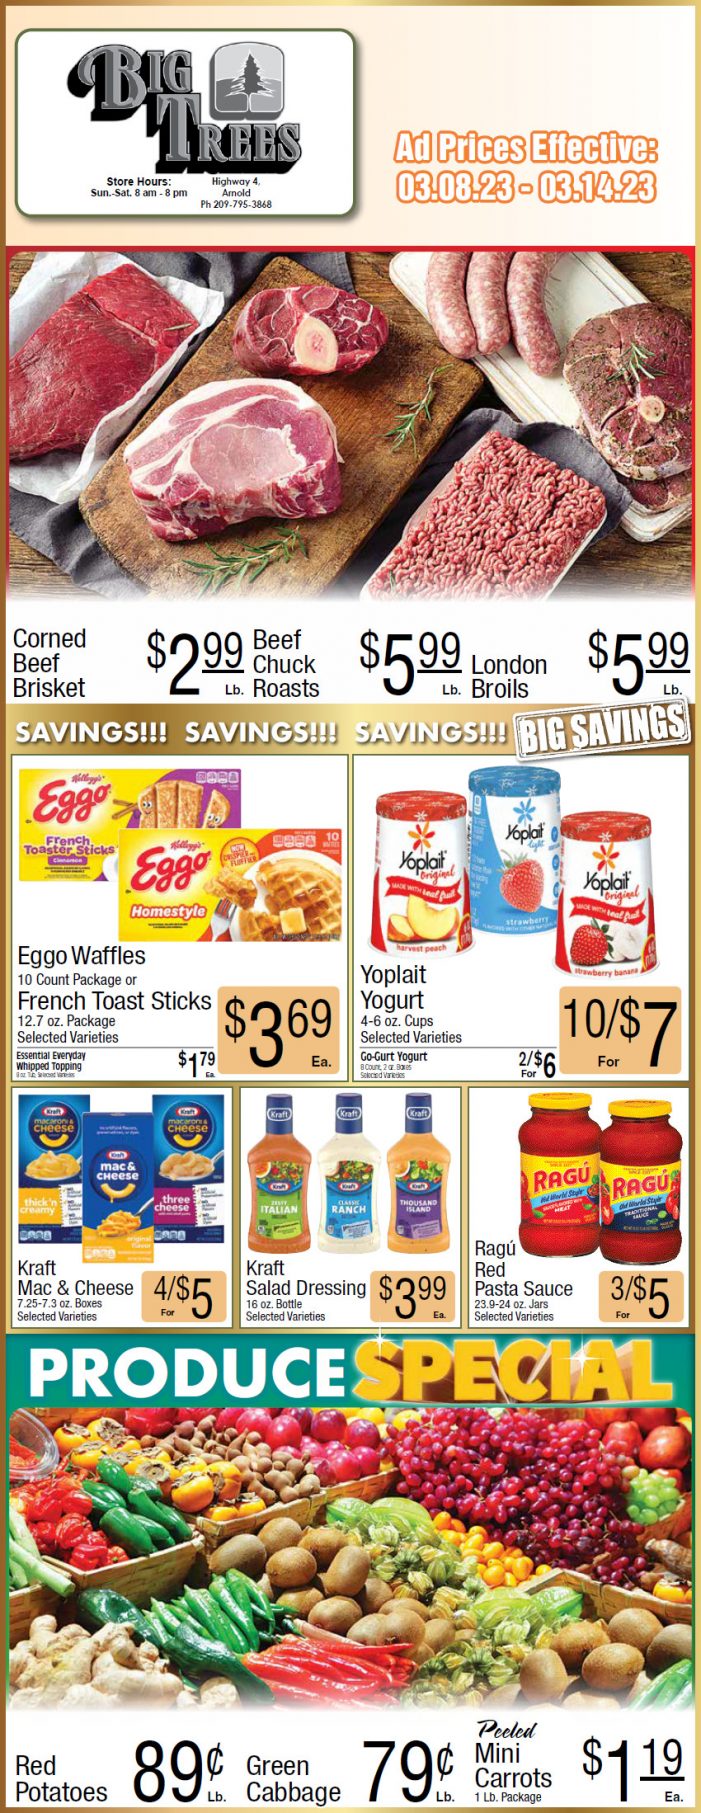 Big Trees Market Weekly Ad & Grocery Specials March 8 – 14th!  Shop Local & Save!!